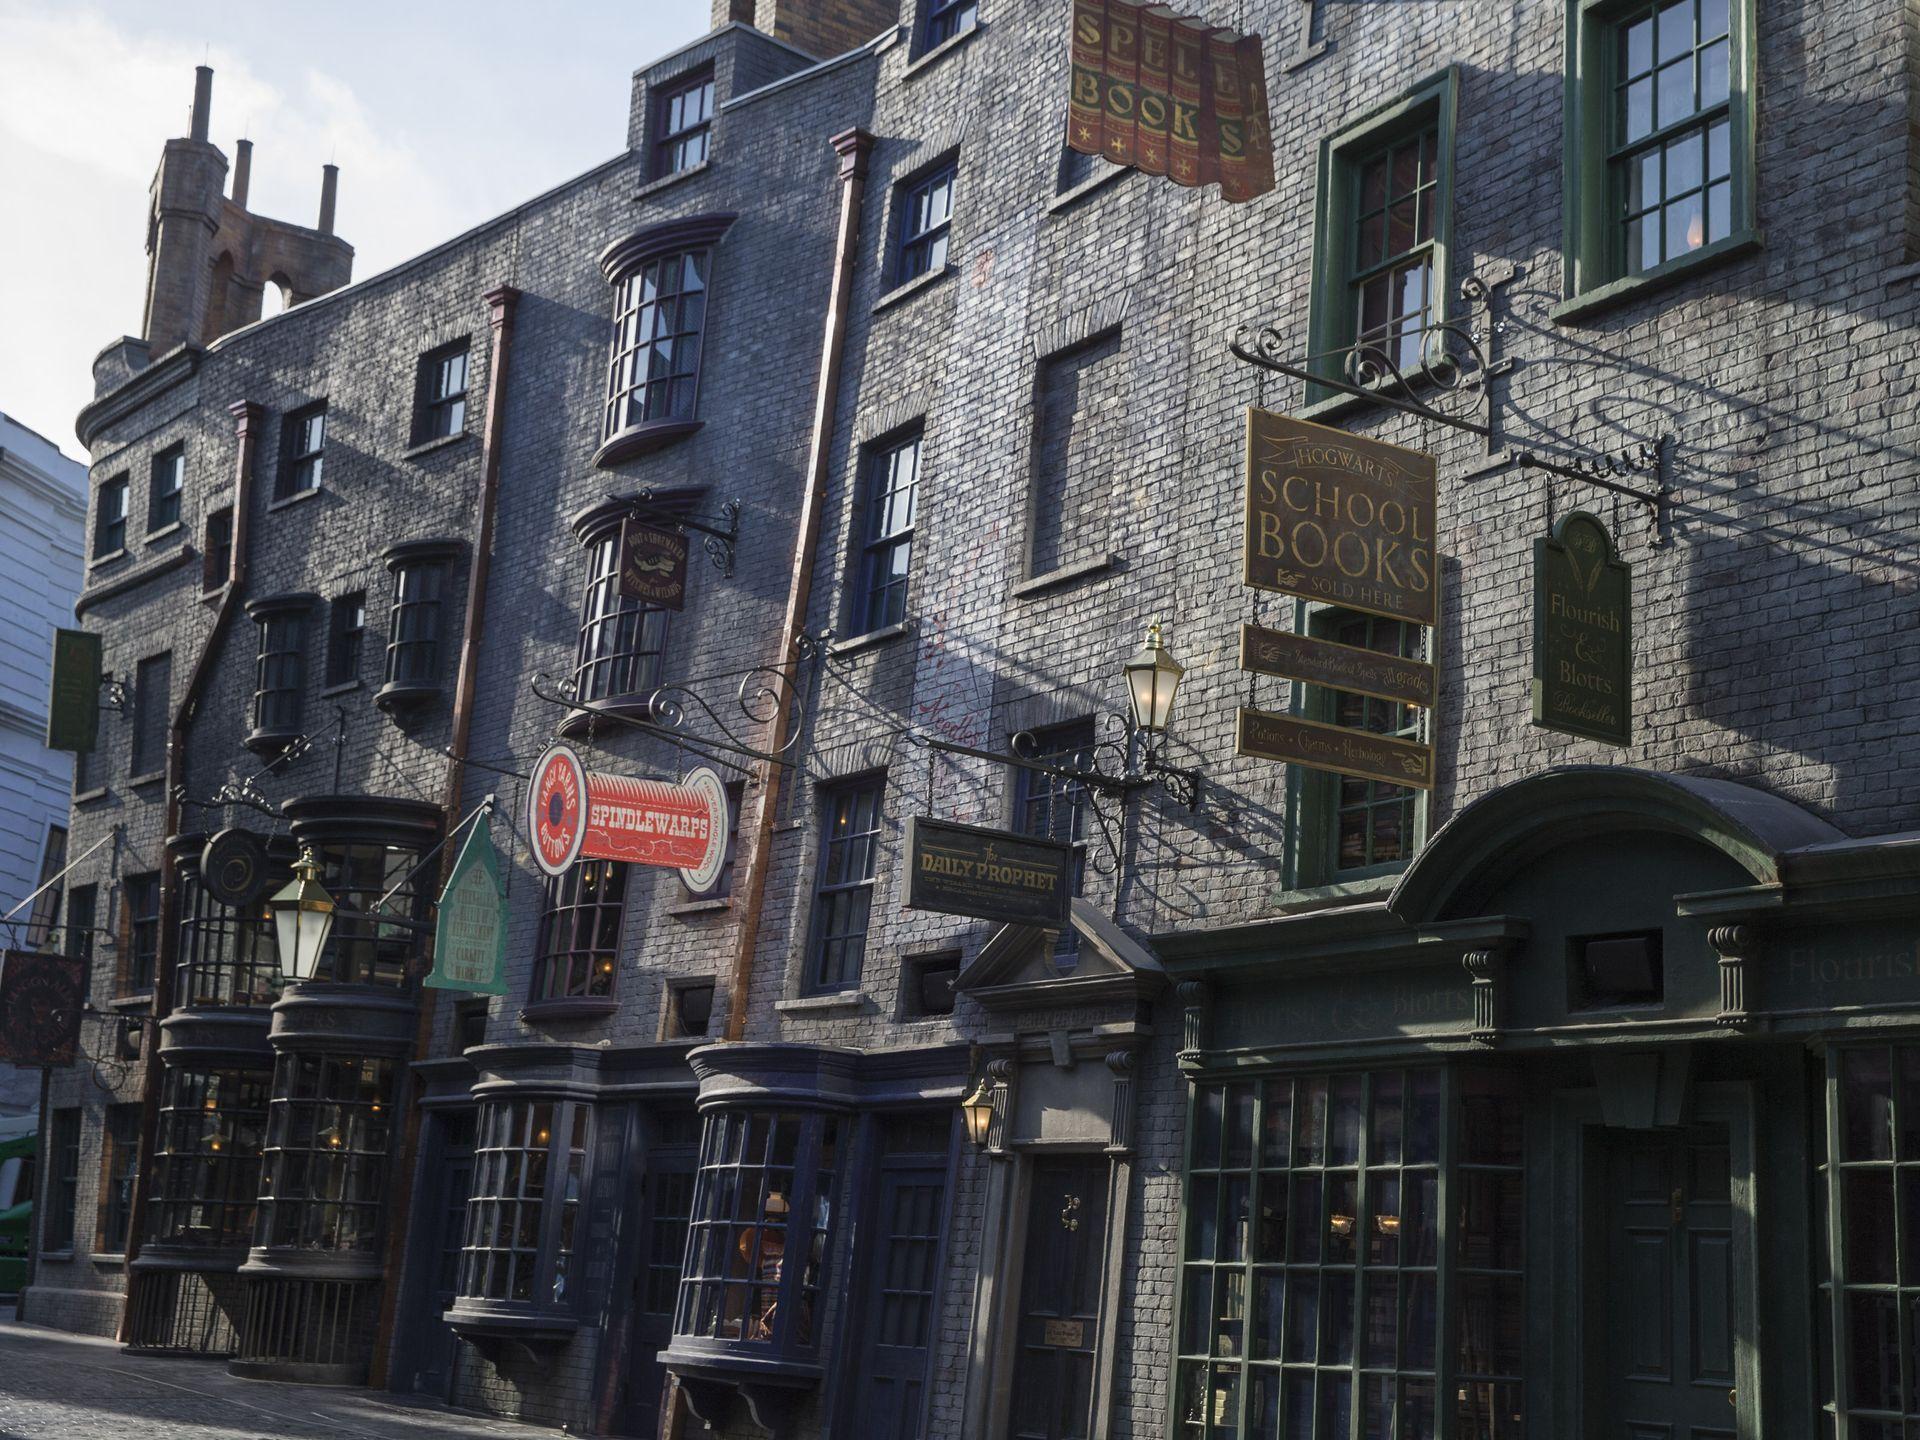 USA Today Takes Us Behind the Brick Wall: Brand New Diagon Alley